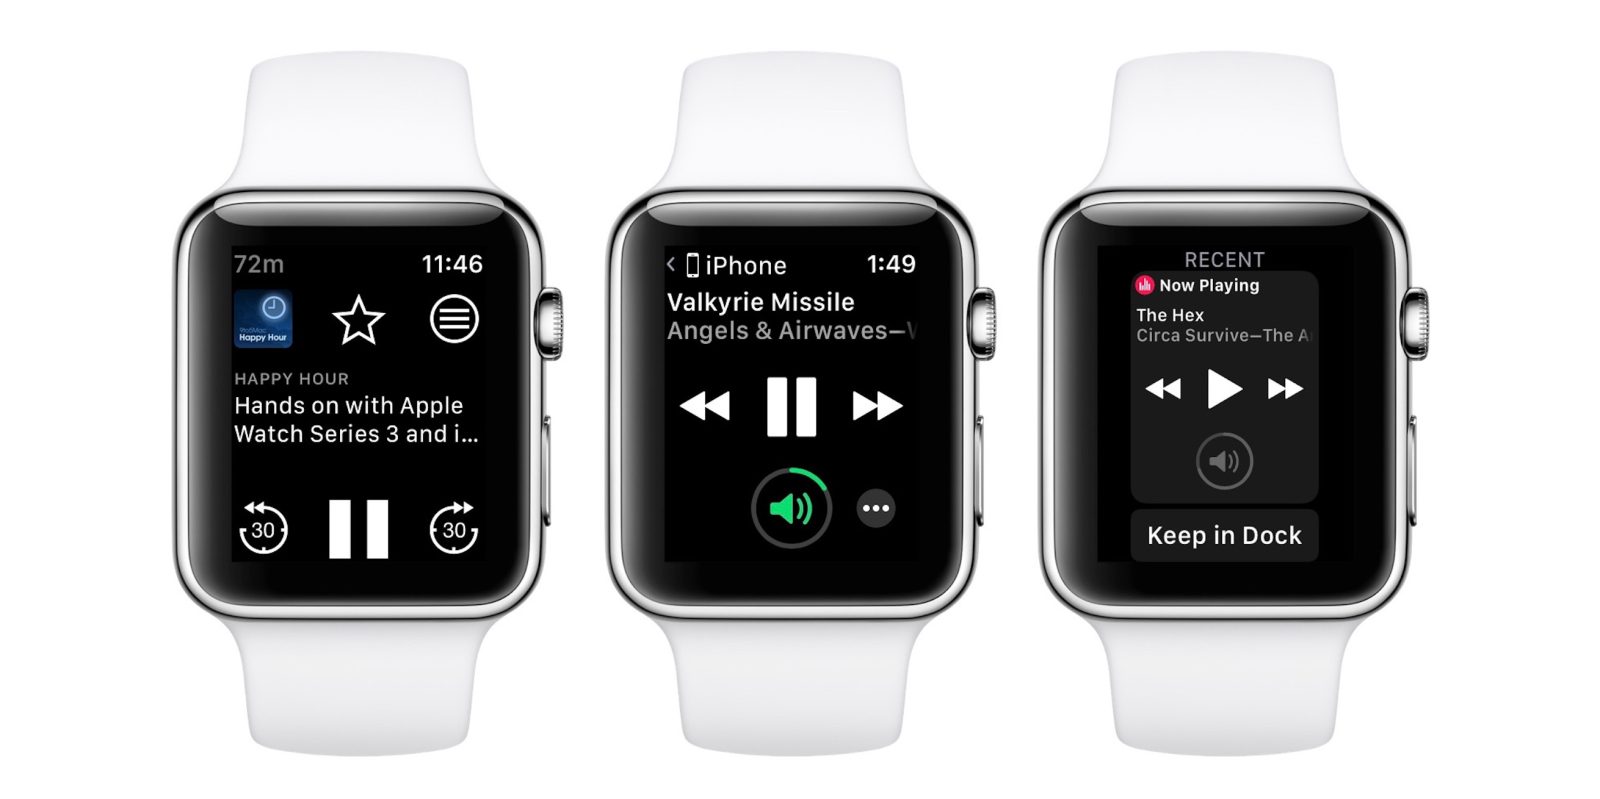 youtube music on apple watch offline without phone